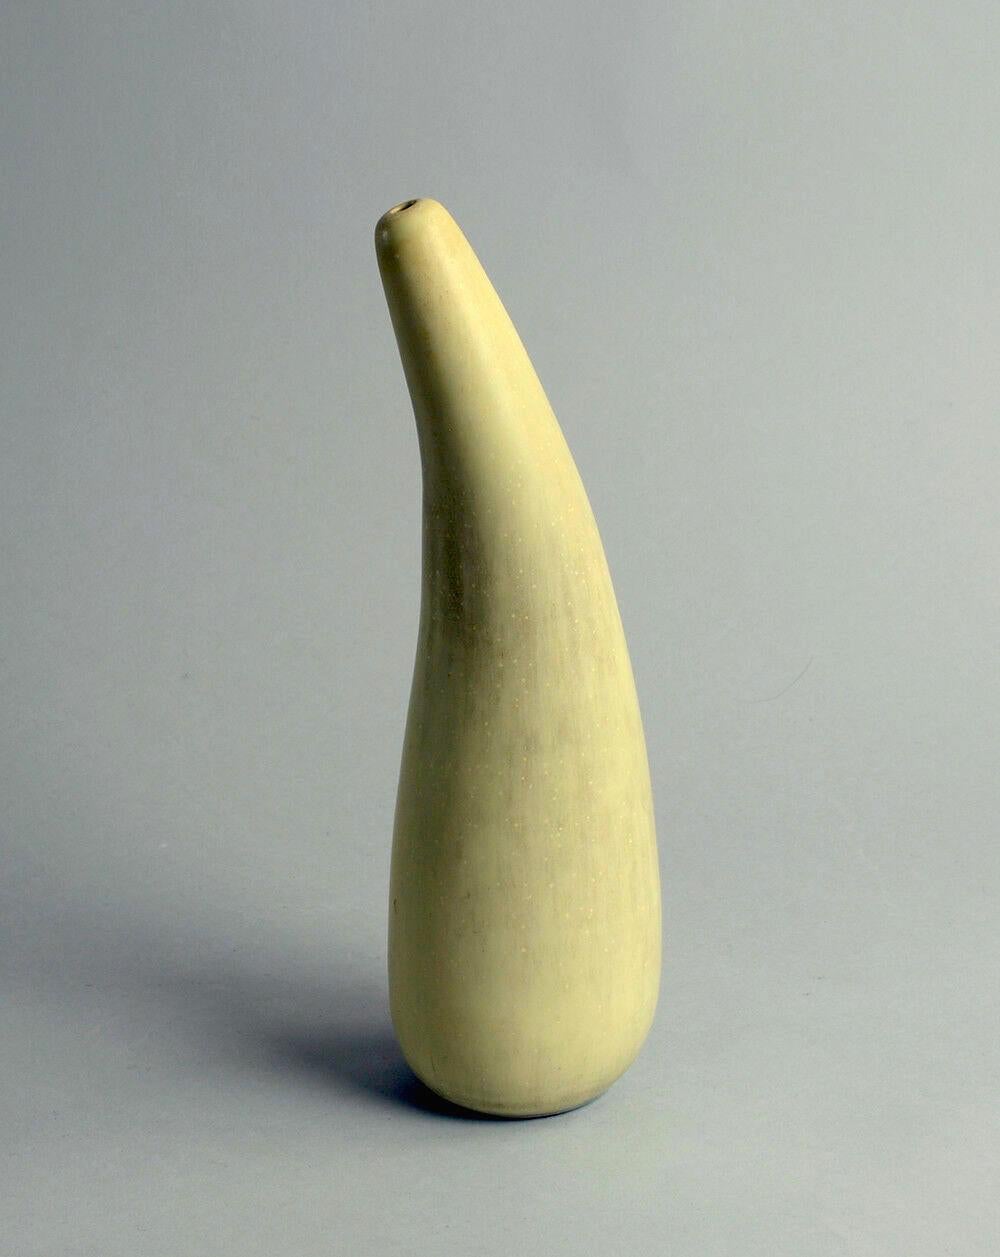 This unique stoneware vase by the great Swedish ceramist Stig Lindberg has a lovely asymmetrical organic form and a gorgeous matte glaze. Made at the Gustavsberg Studio in 1960.

Measures: 9 3/4